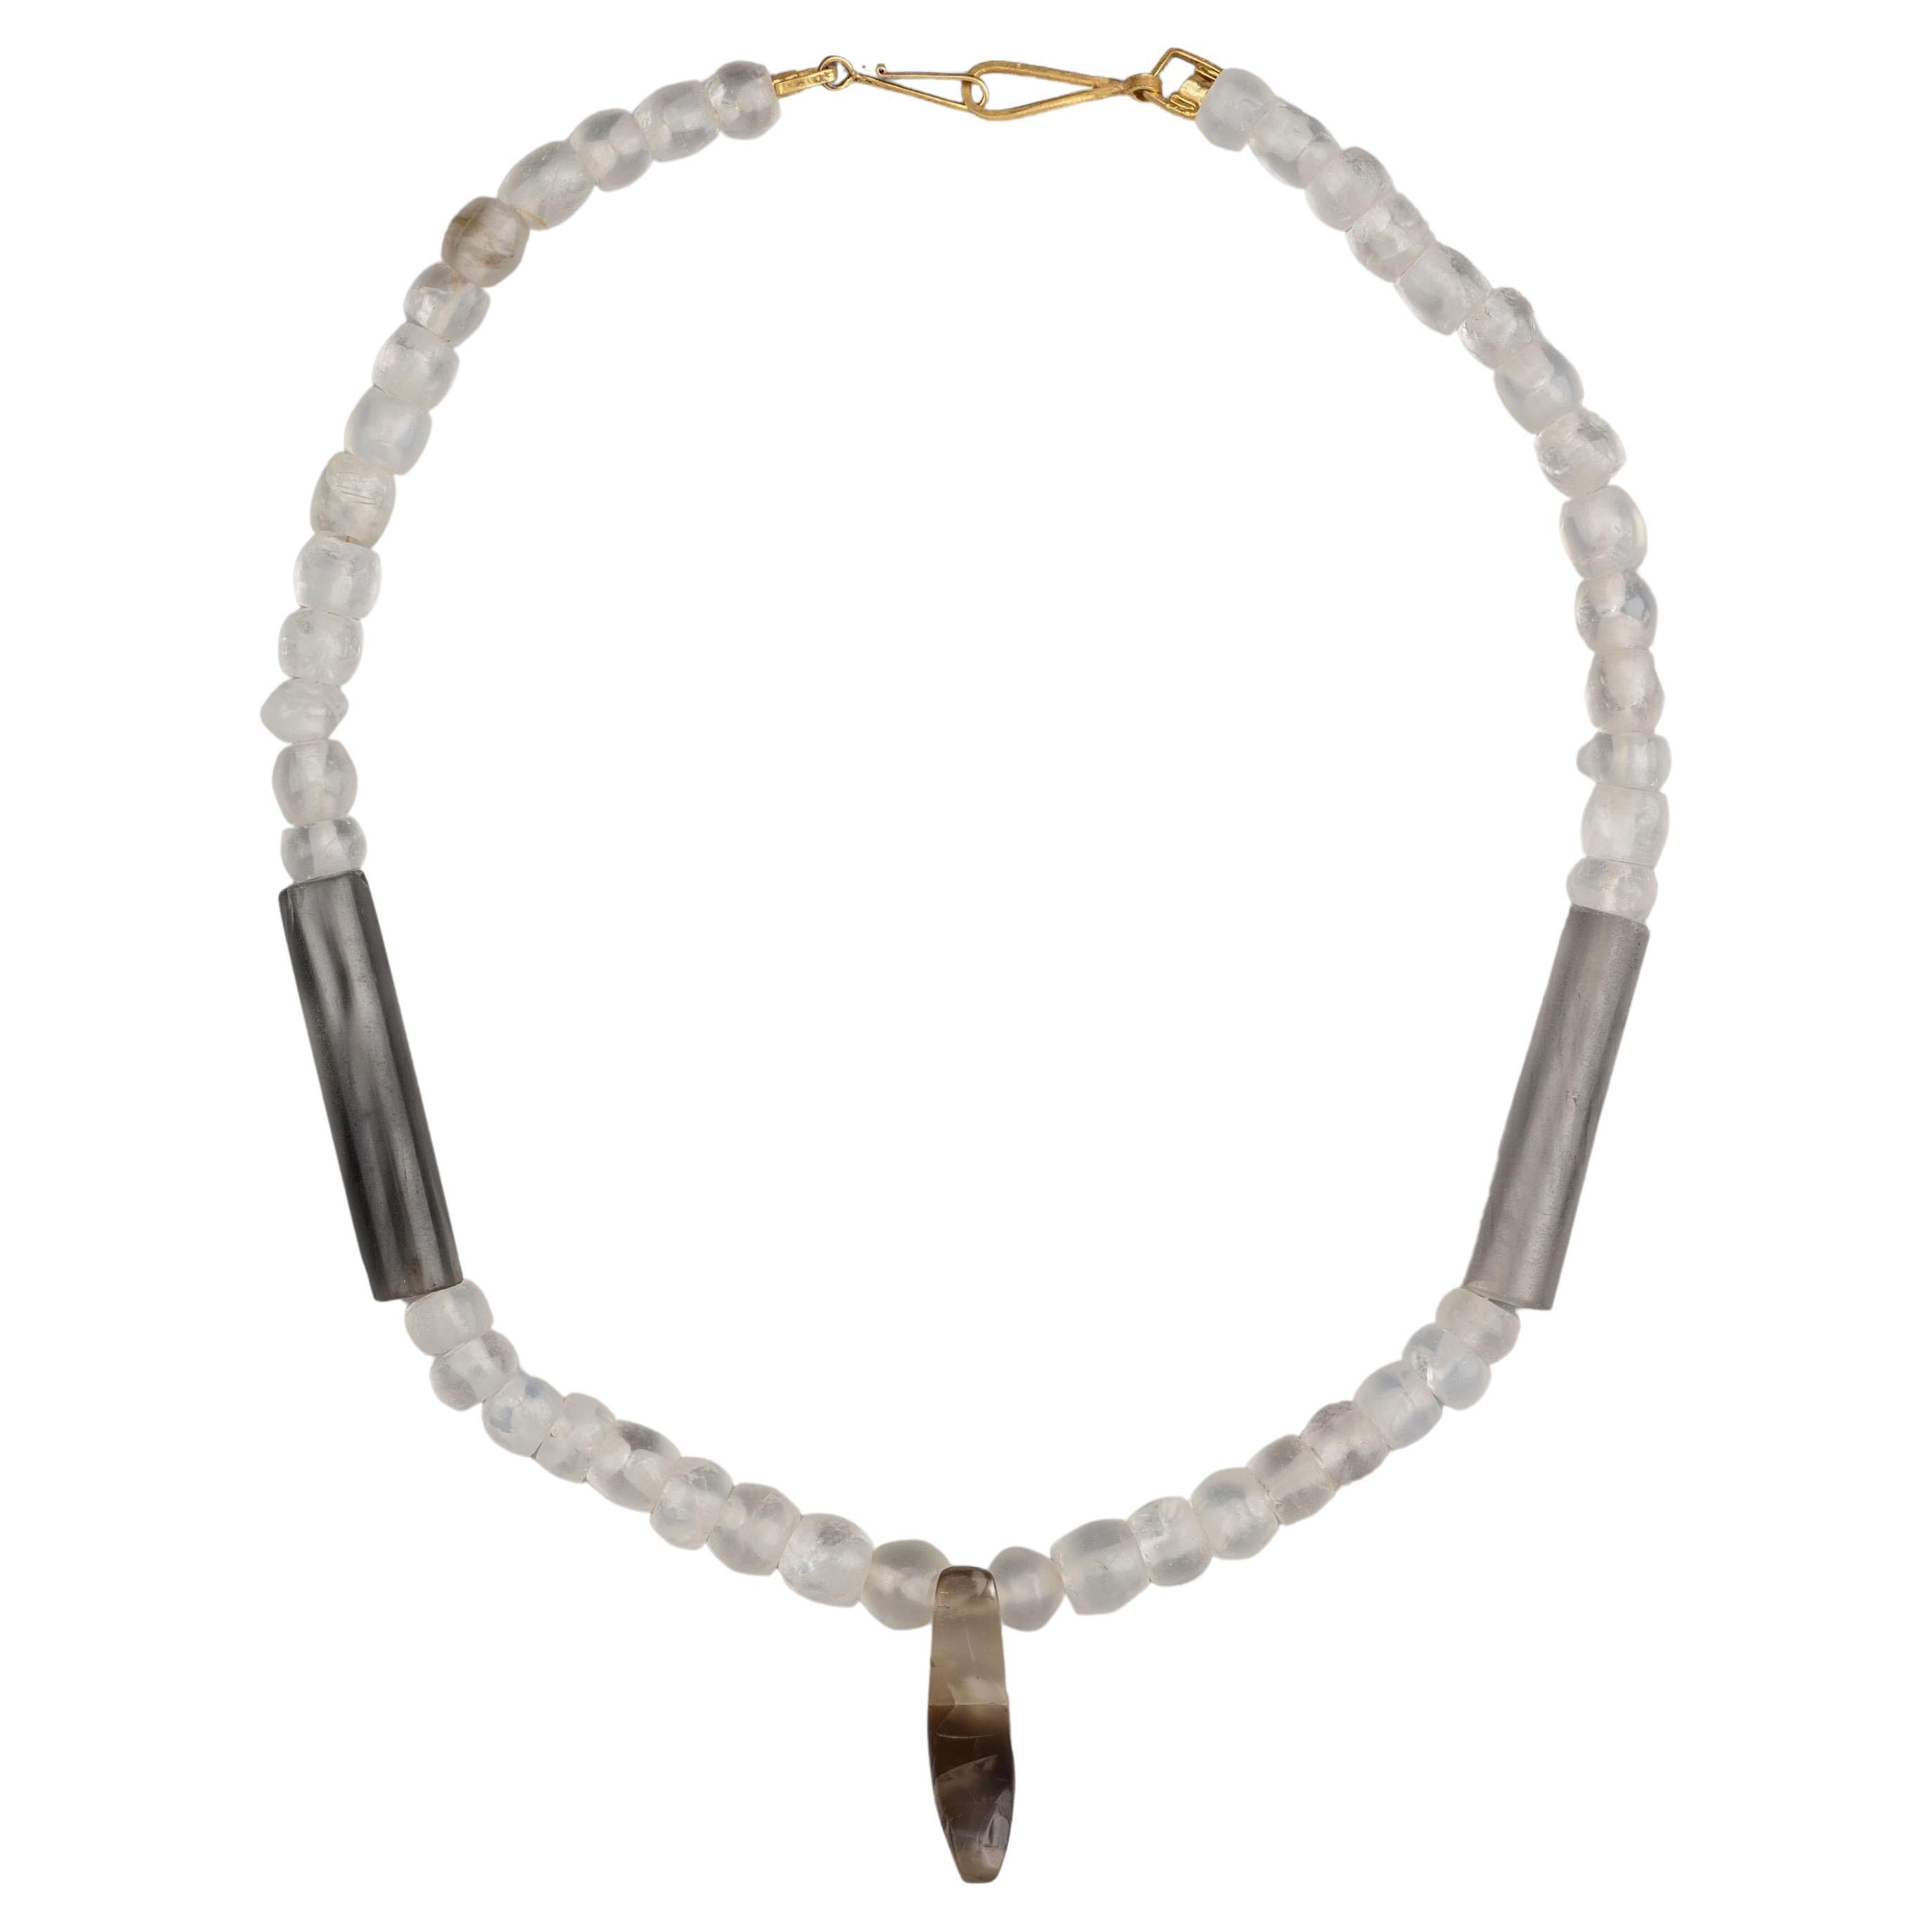 Ancient Tairona Crystal Beads with Smoky Quartz and Bird Pendant, 22k Gold Clasp For Sale